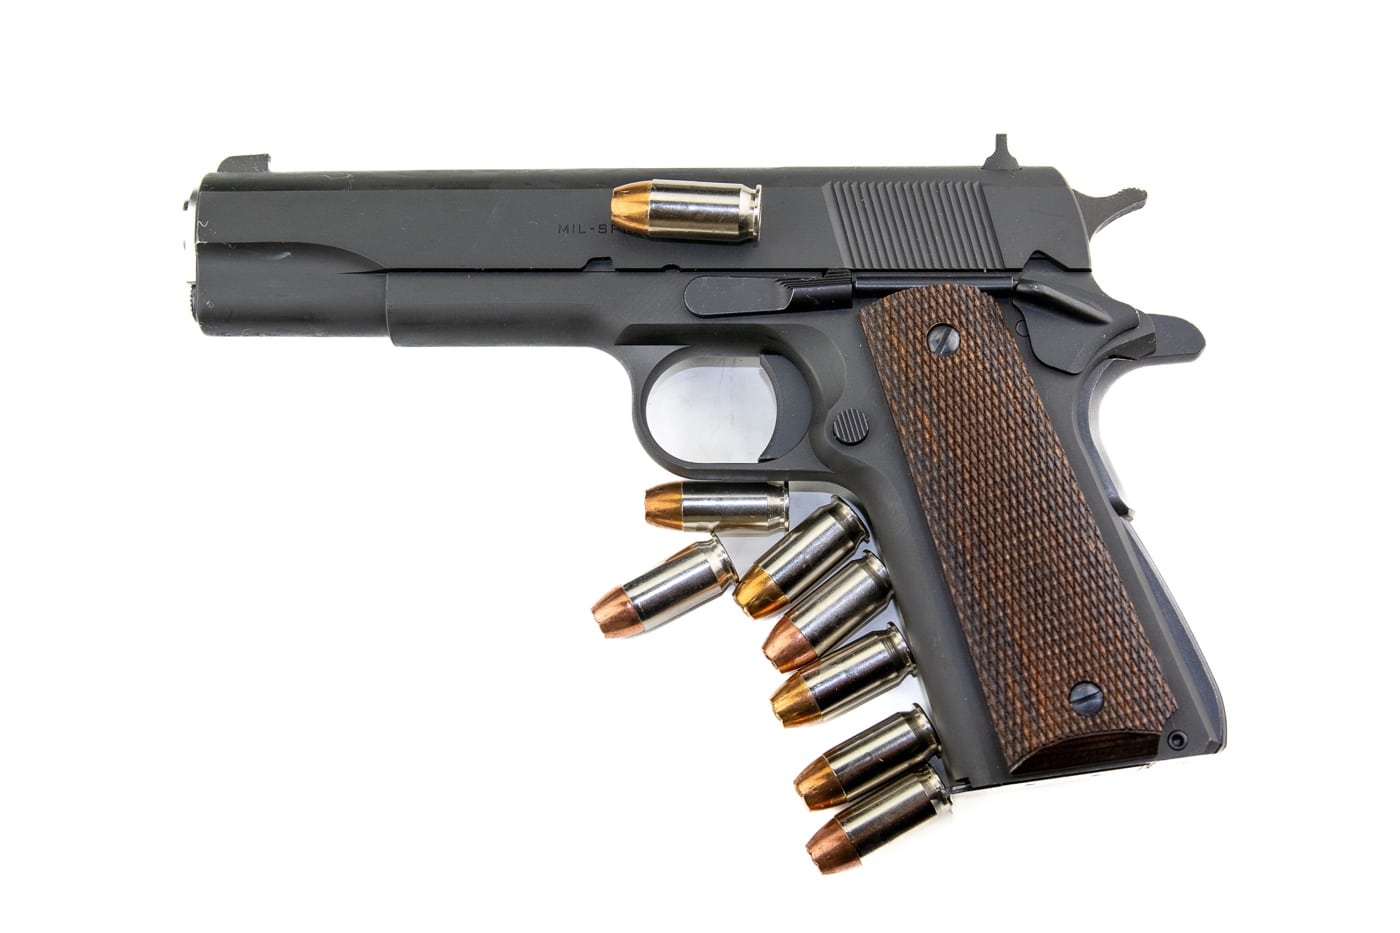 Shown is the author's representation of a 1911 handgun in Condition 2. Cartridges are shown stacked as if in the pistol. This mode of carry is preferred by people who want to achieve a greater degree of safety. However, it is slower than condition 1 carry since the 1911 with the hammer down needs to be cocked. 